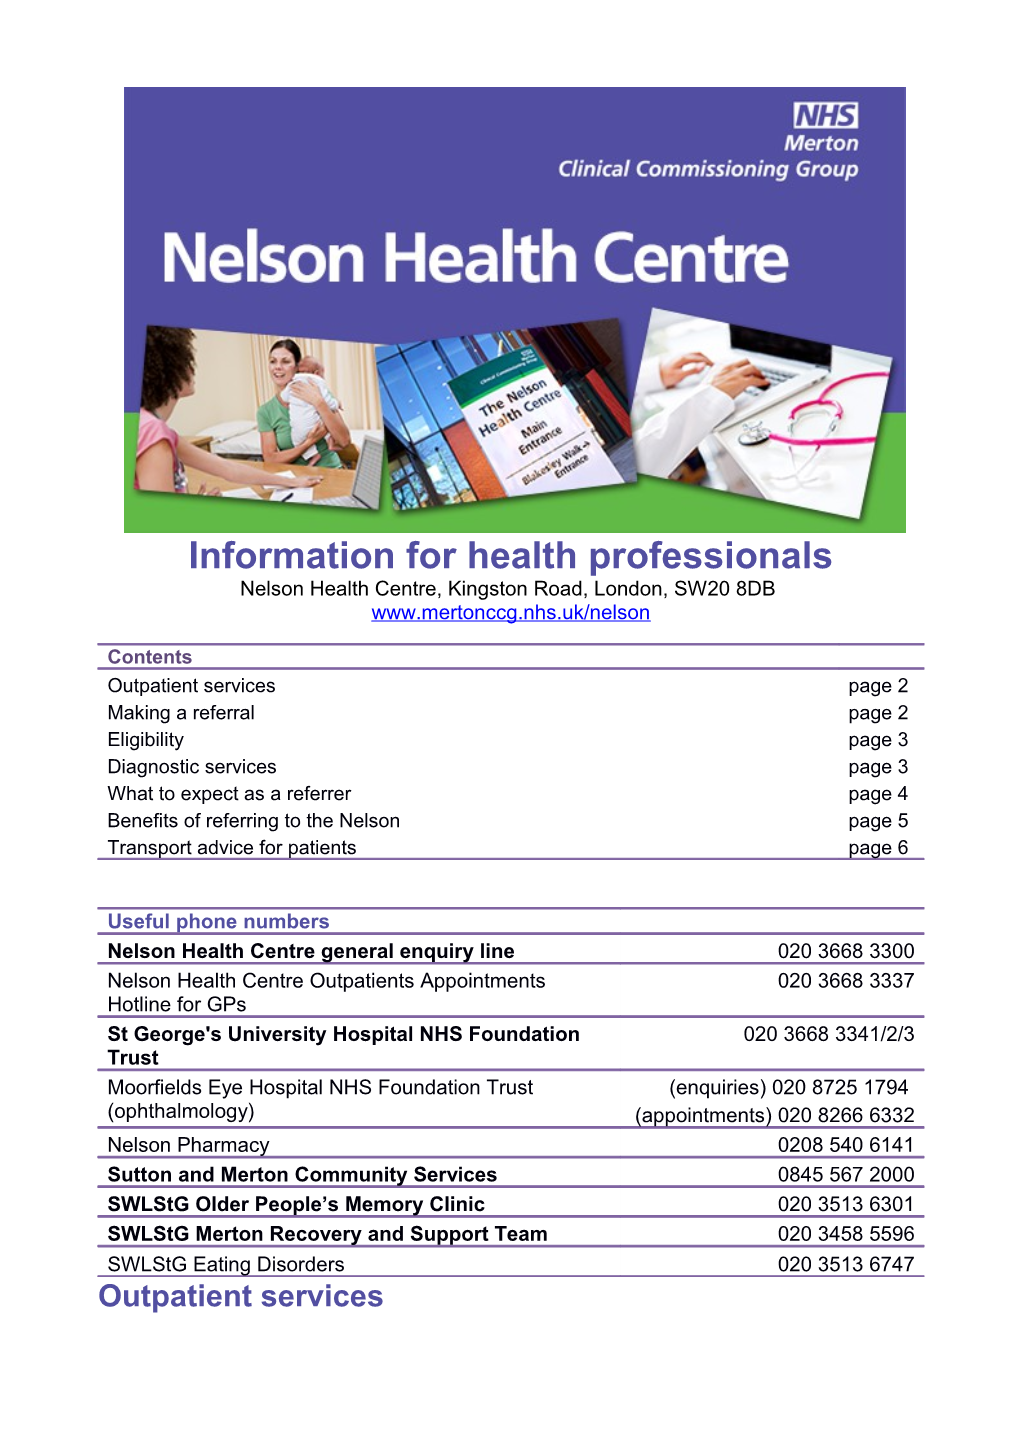 Information for Health Professionals